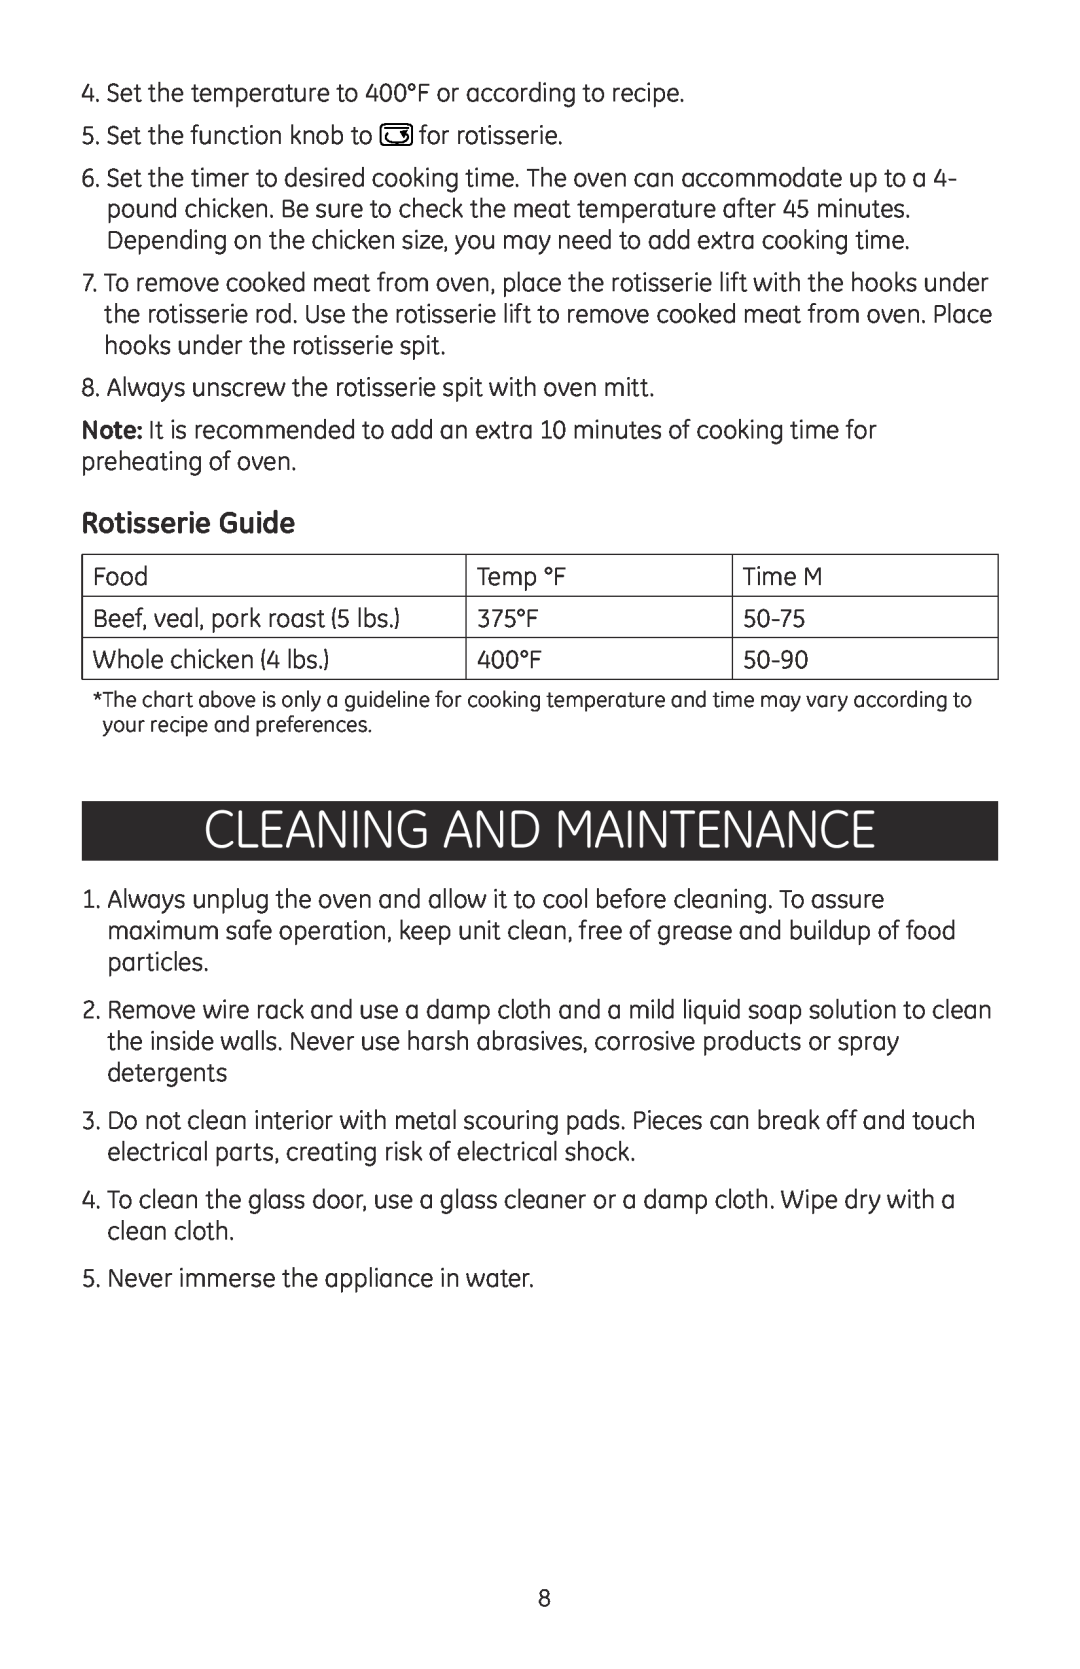 GE 169074 manual Cleaning and Maintenance, Rotisserie Guide 